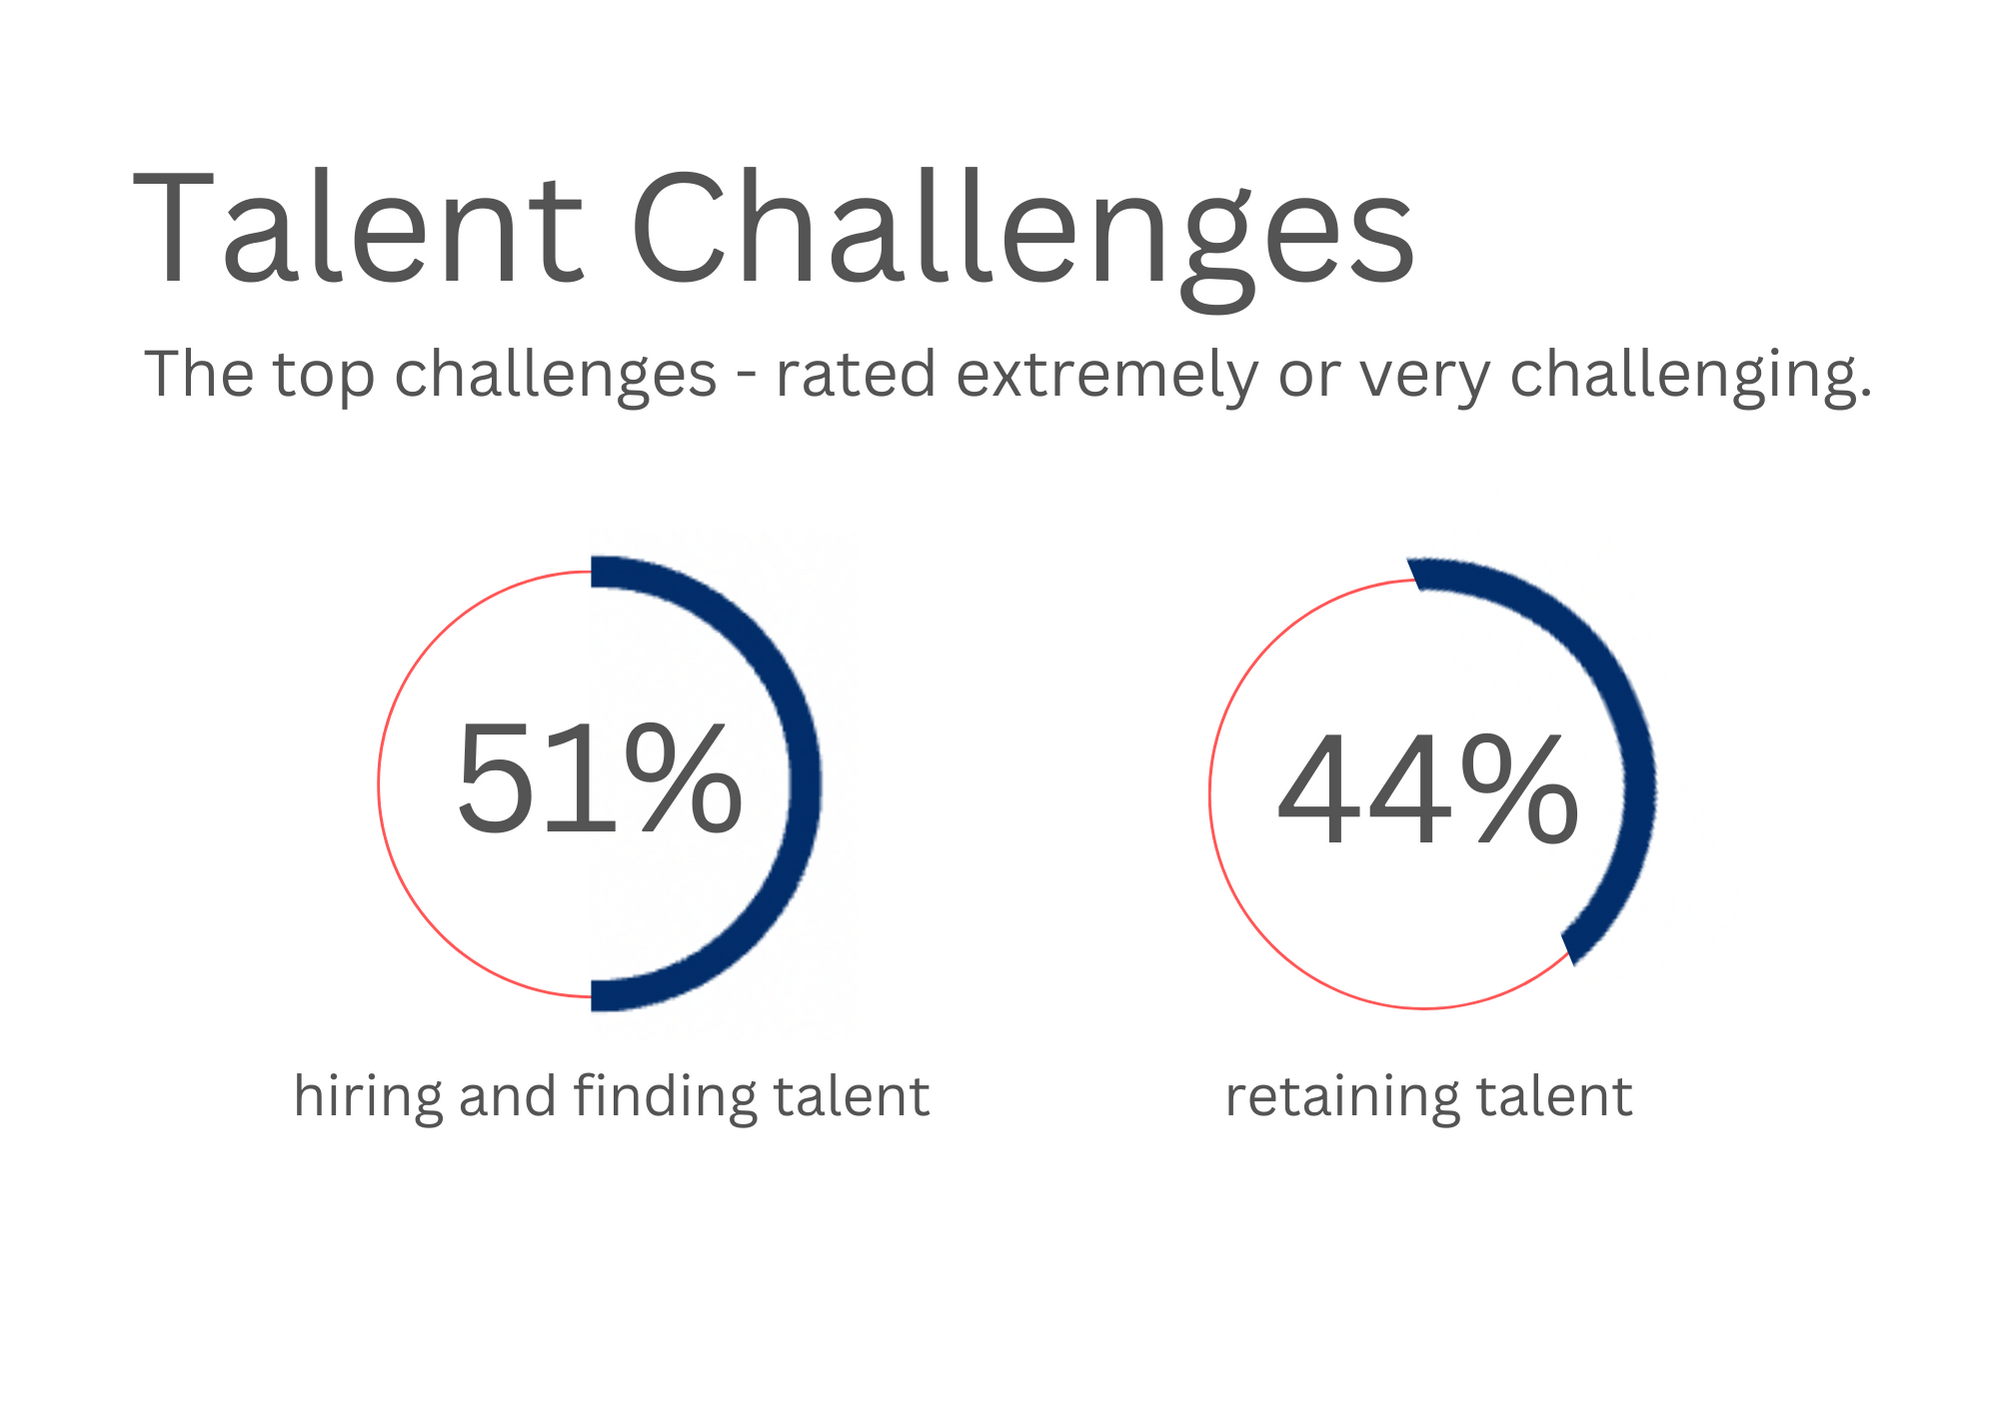 According to the 2022 MHI Annual Industry Report, 51% of companies rate hiring and find talent extremely or very challenging, while 44% find retaining talent difficult.